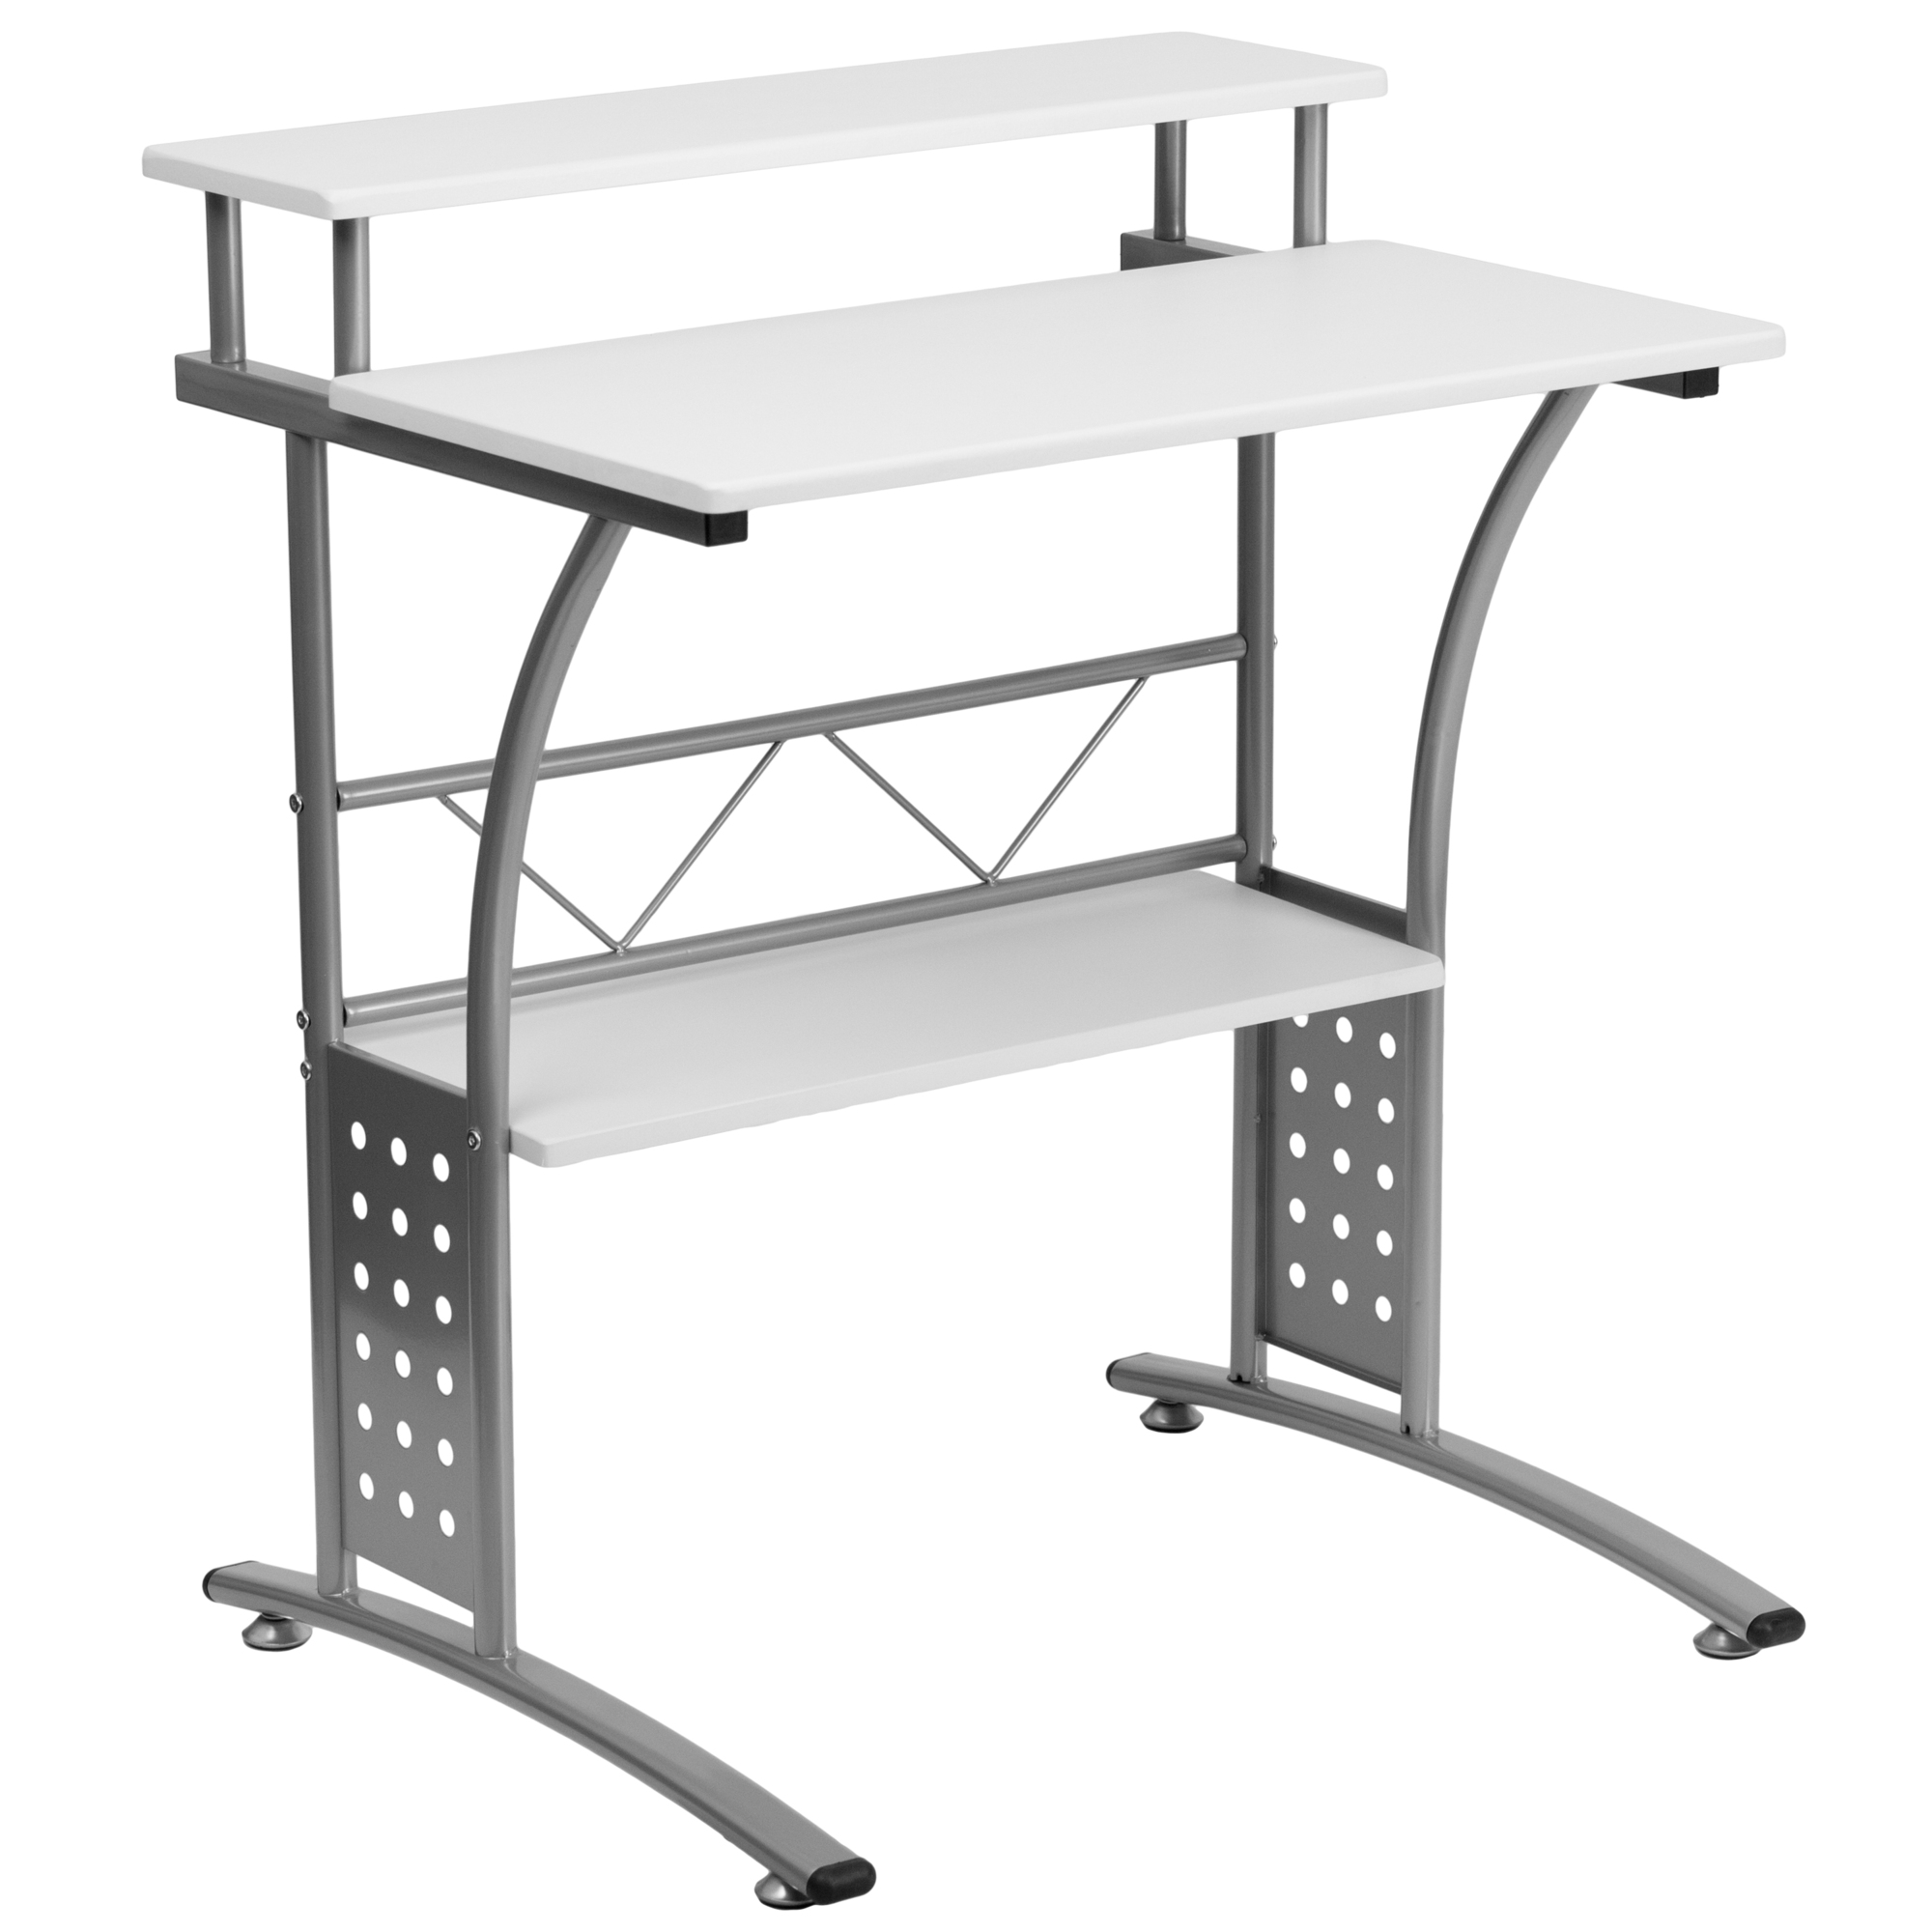 Flash Furniture, White Computer Desk with Perforated Side Paneling, Width 28 in, Height 33 in, Depth 23.5 in, Model NANCLIFTONWH